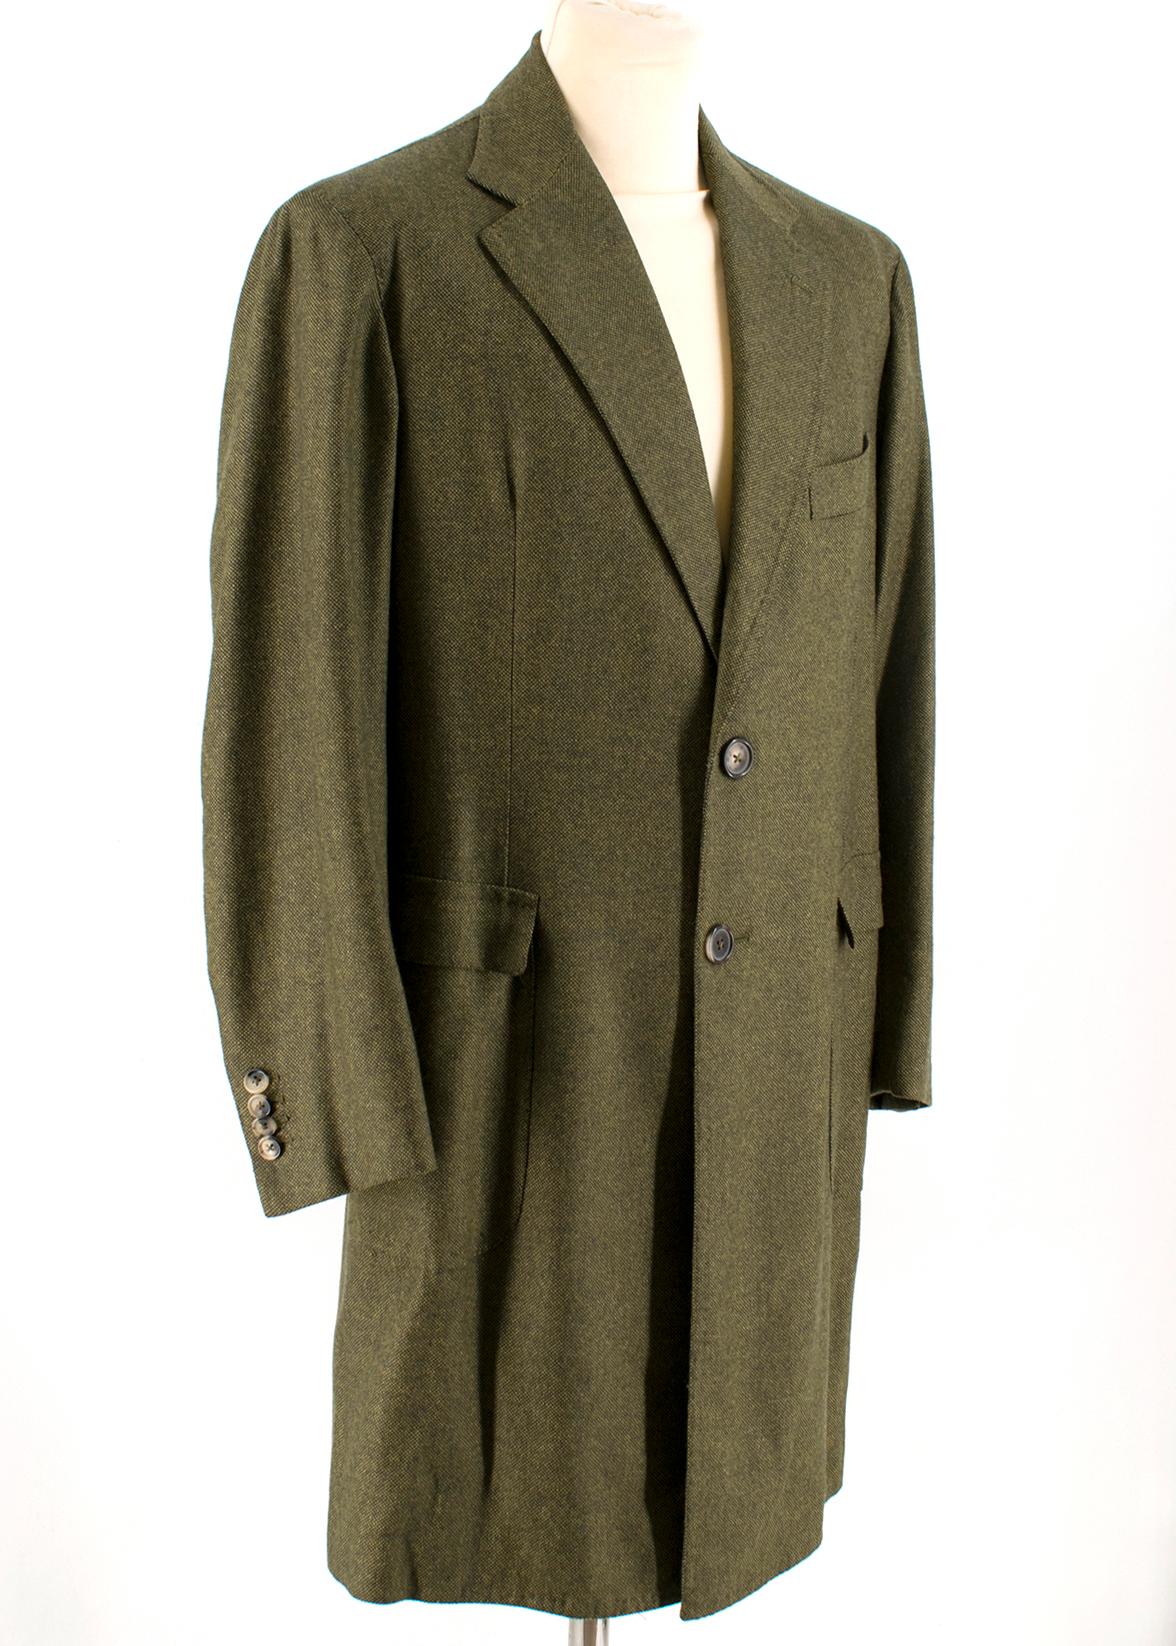 Gennano Solito long green textured coat

- notch lapels
- Buttons closure
- Buttons cuff
- Two flapped front pocket
- One chest pocket

Please note, these items are pre-owned and may show some signs of storage, even when unworn and unused. This is